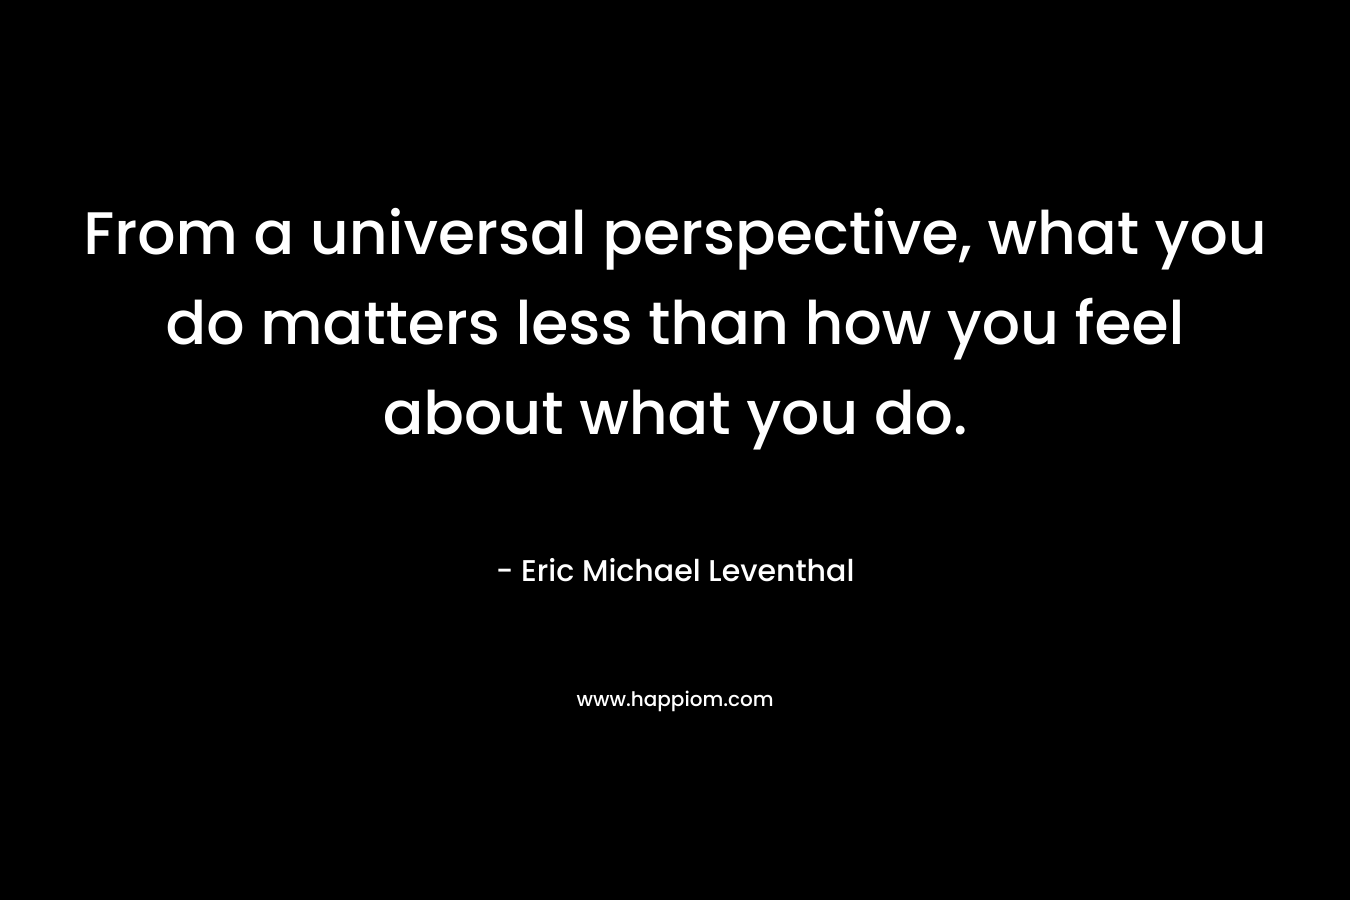 From a universal perspective, what you do matters less than how you feel about what you do.